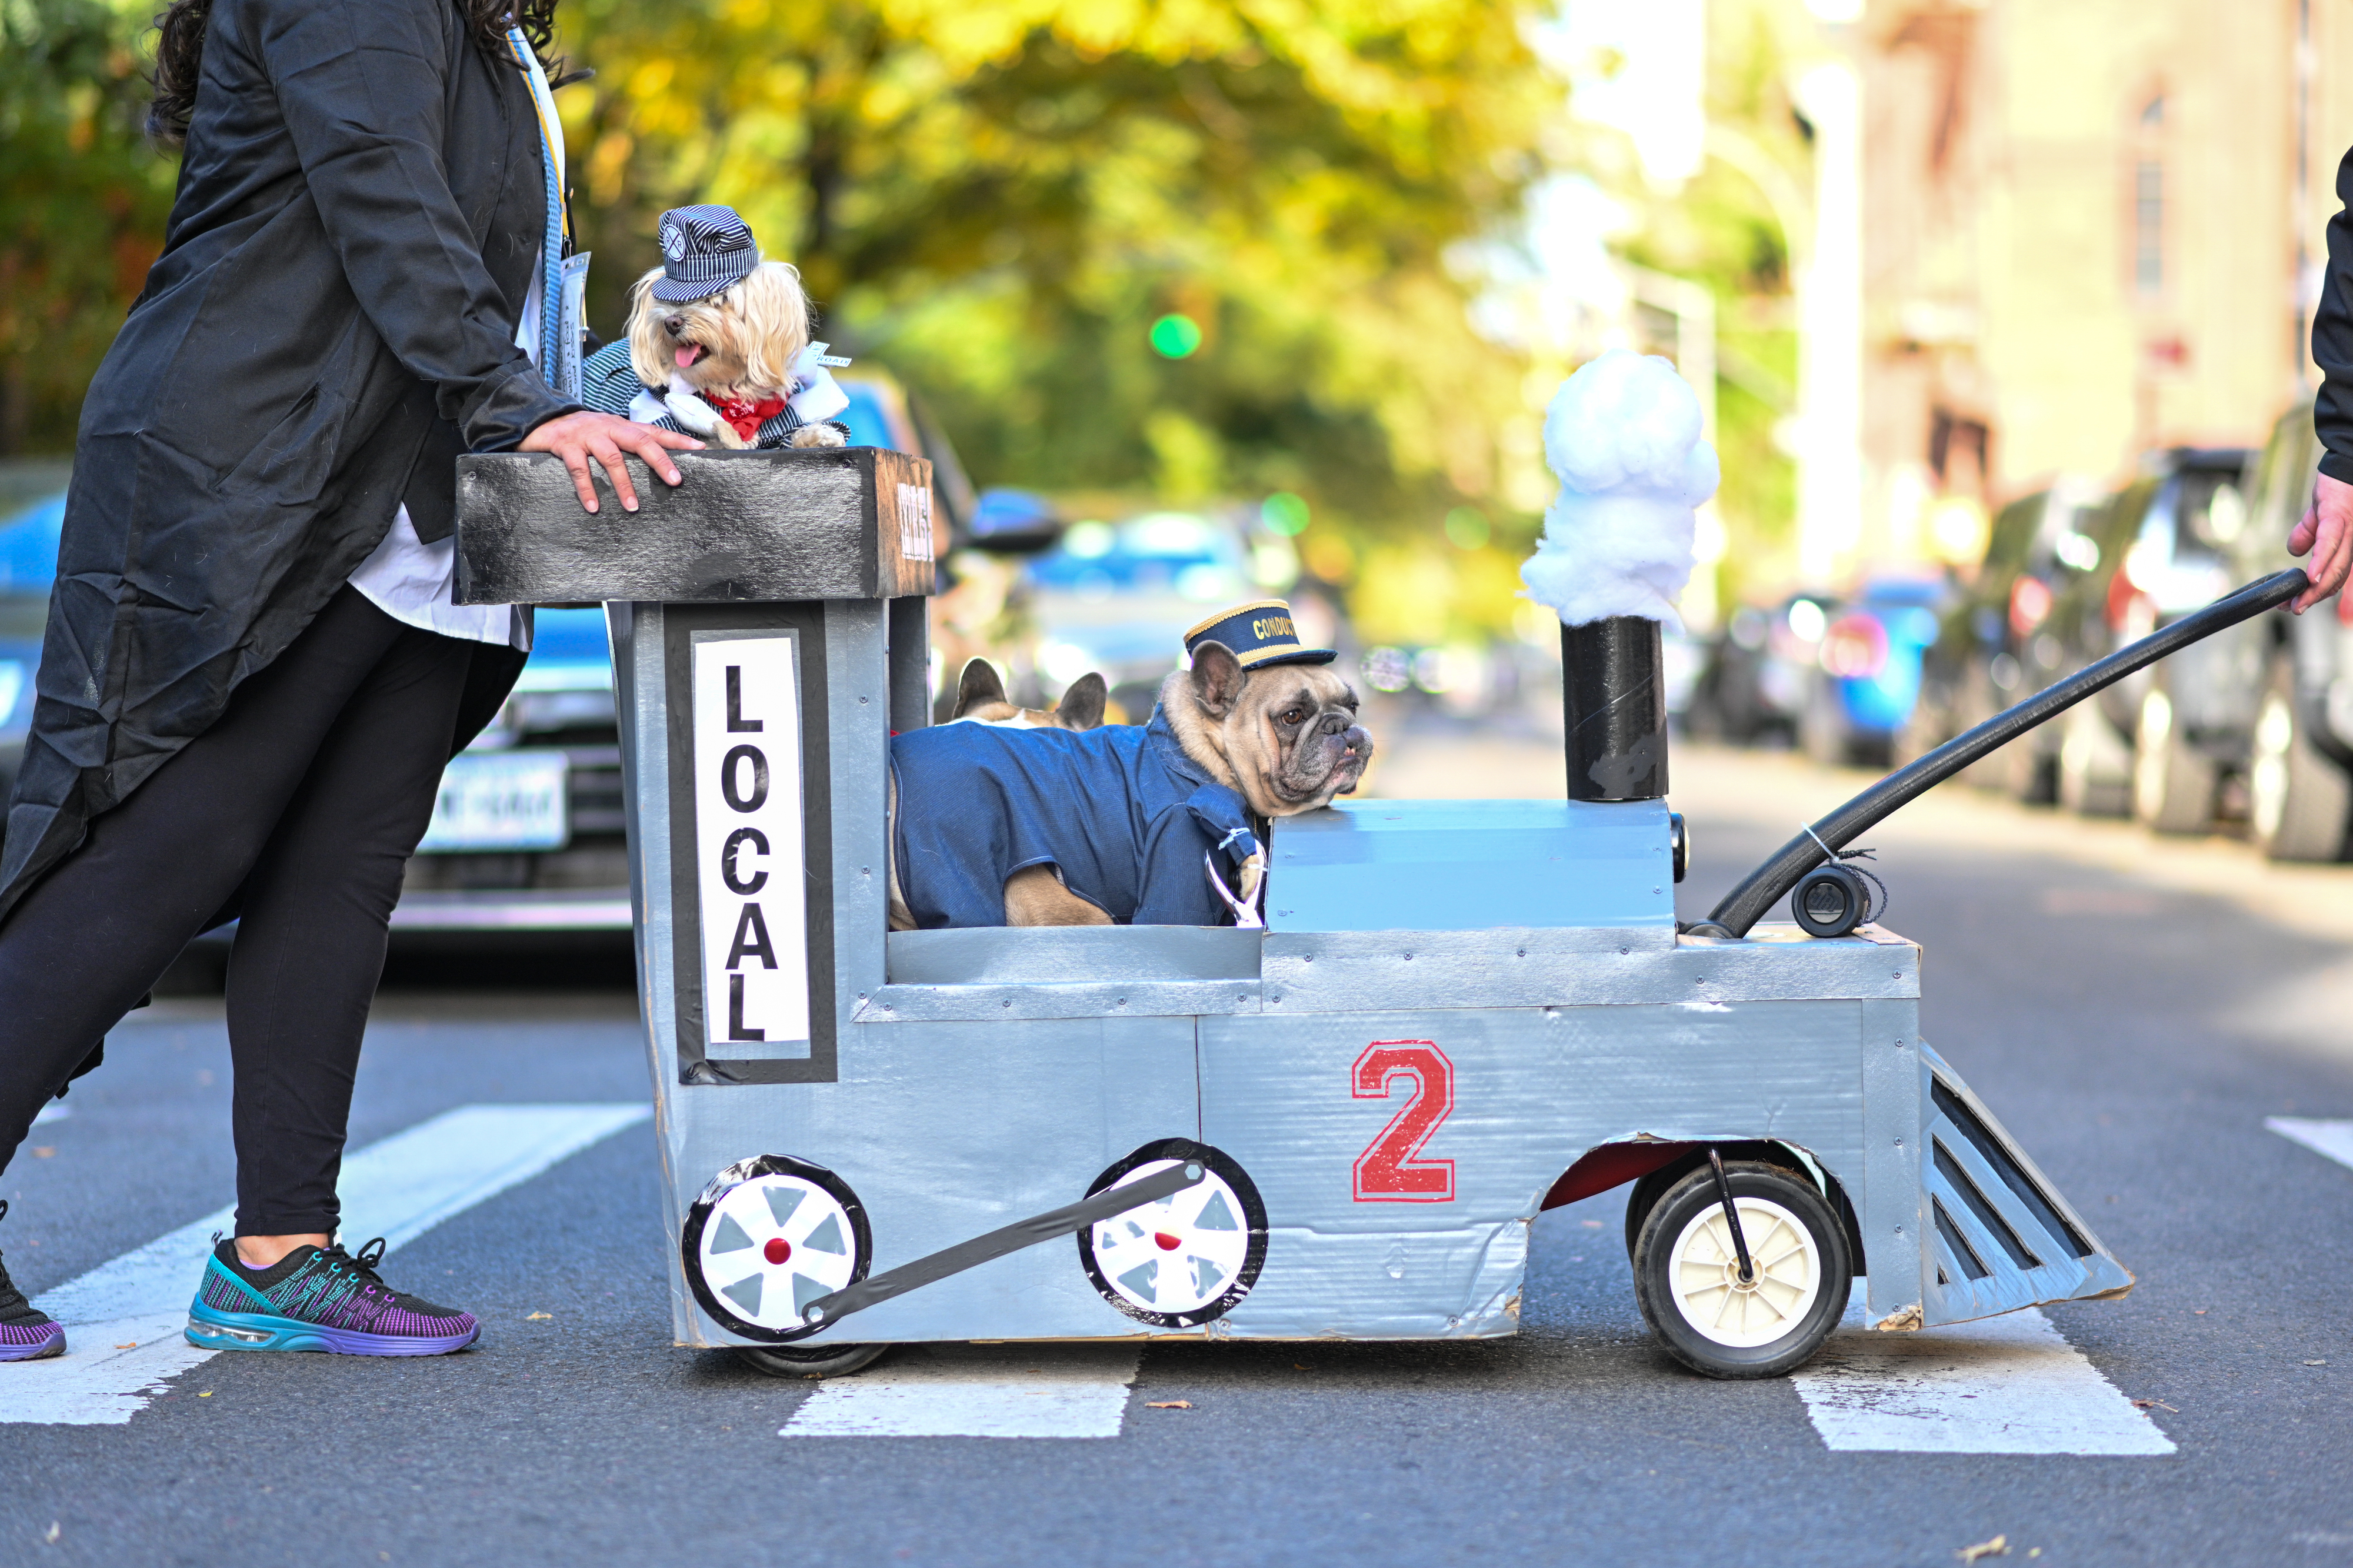 Dianne Ferrer and Tim Lawson wheel french bulldogs, Carly and Max all dressed as a train and the conductors. (Photo by Alexi Rosenfeld/Getty Images)